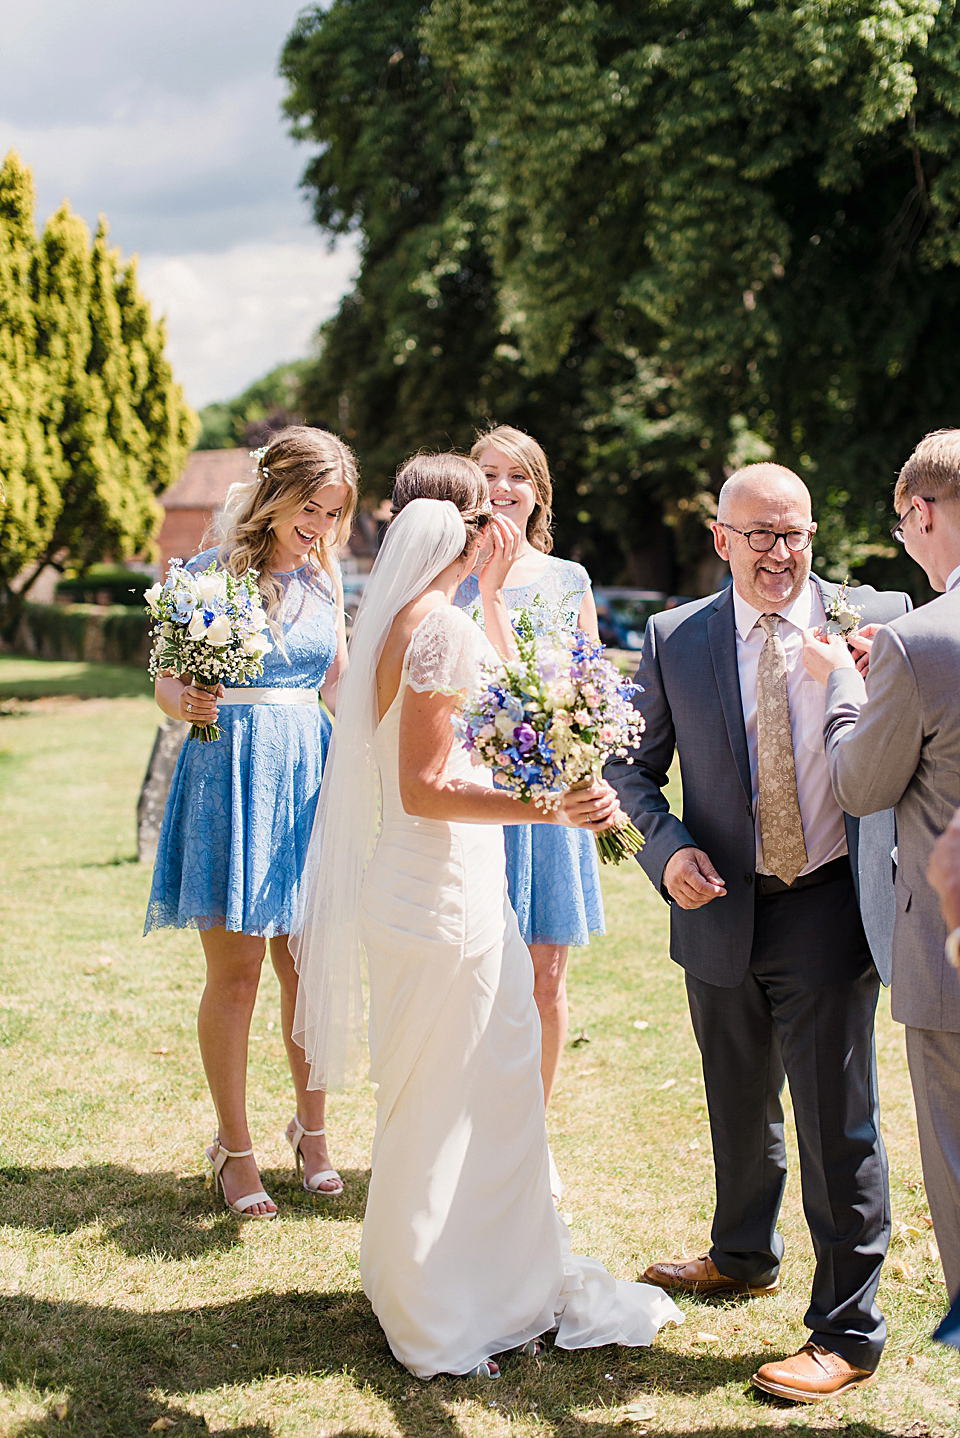 Bride Daisy wore a Stella York gown for her pale blue and flower filled Summer wedding in the English countryside. Photography by Faye Cornhill.